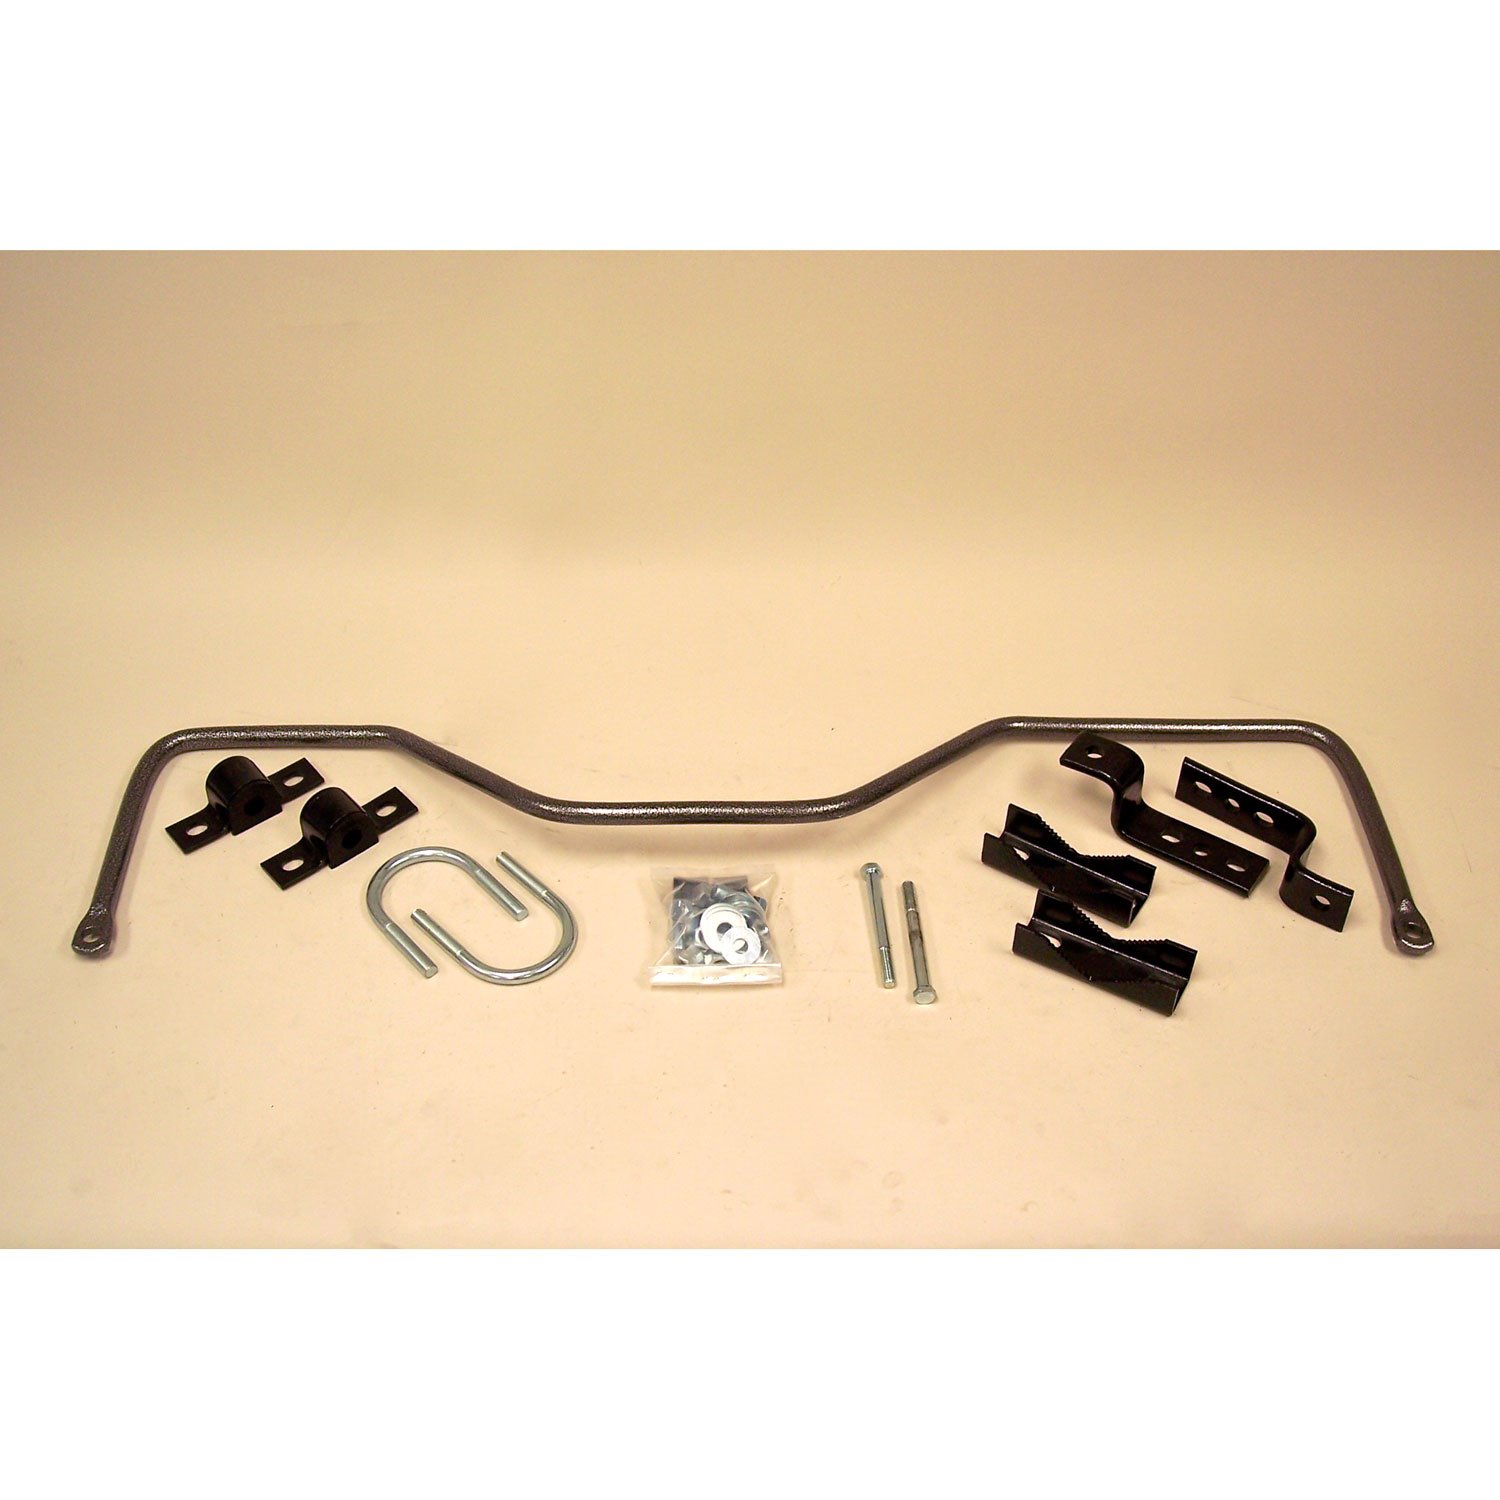 Rear Sway Bar for 1986-2005 Chevy Astro and